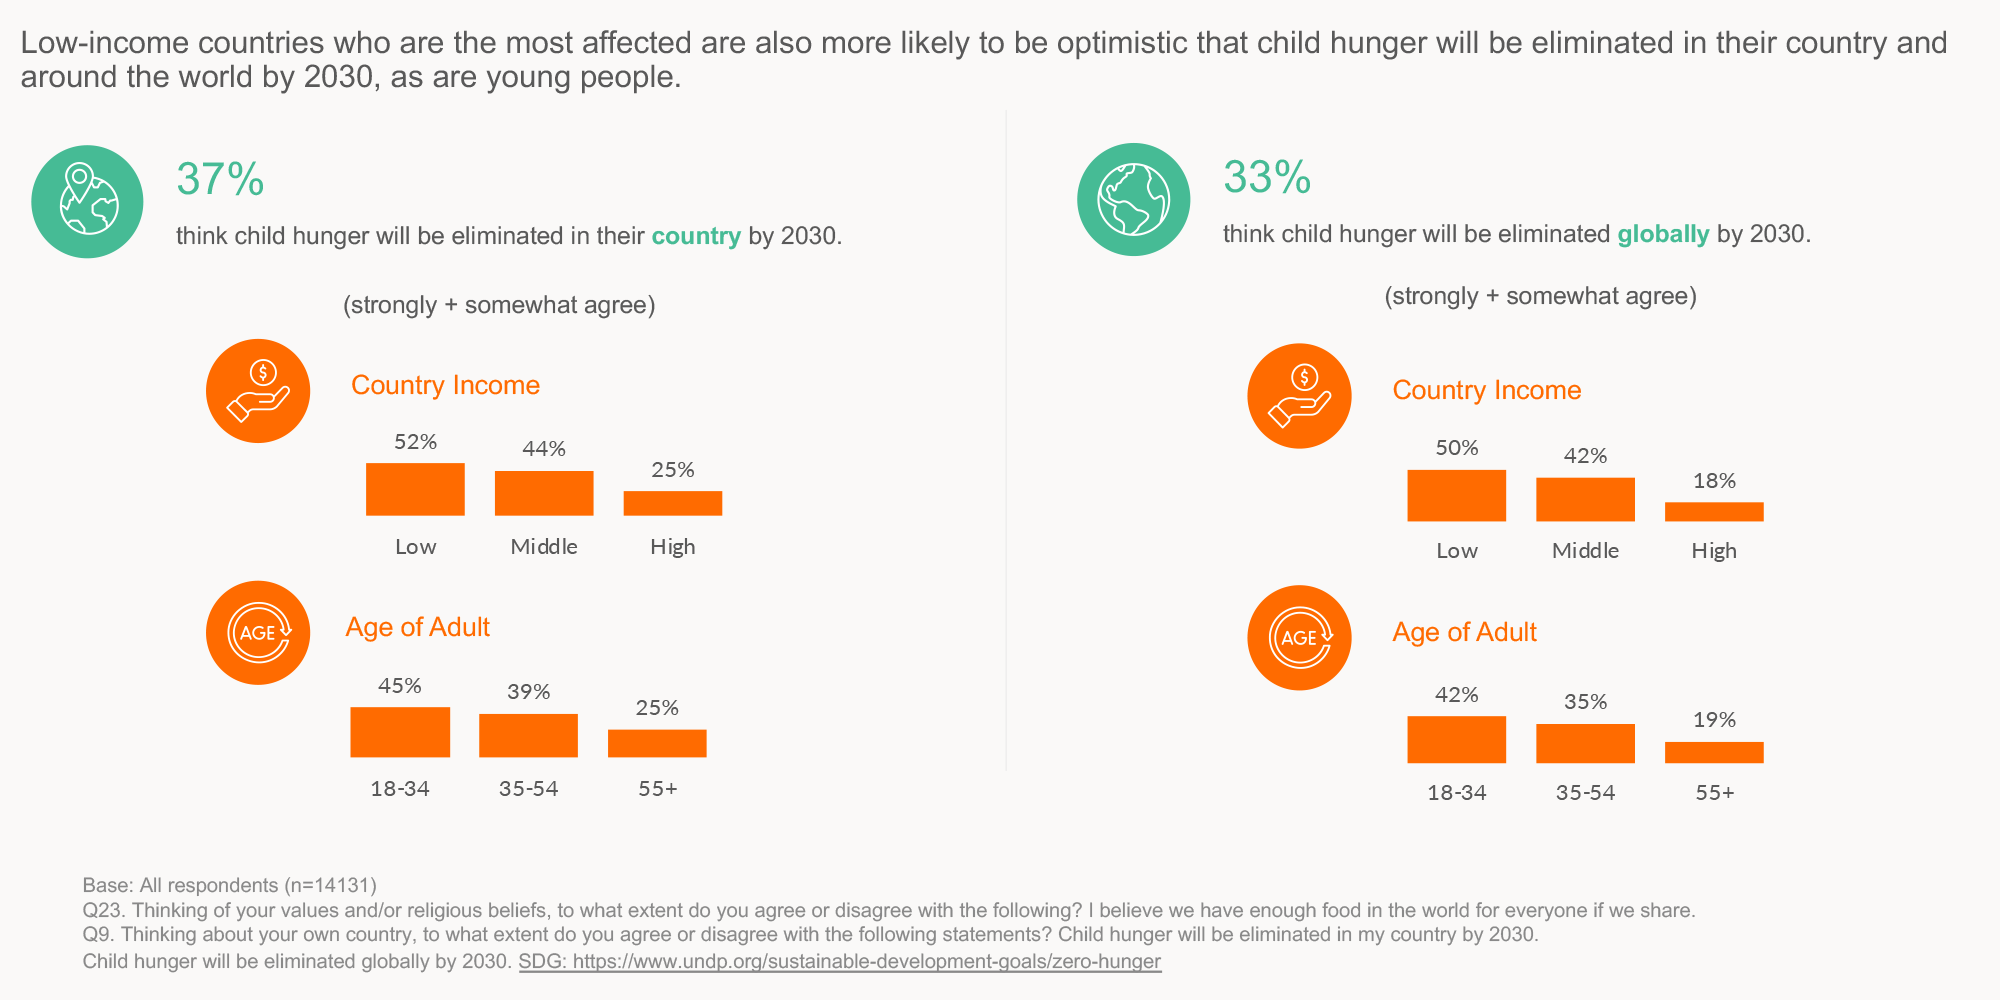 Ipsos | Low-income countries who are the most affected are also more likely to be optimistic that child hunger will be eliminated in their country and around the world by 2030, as are young people. 